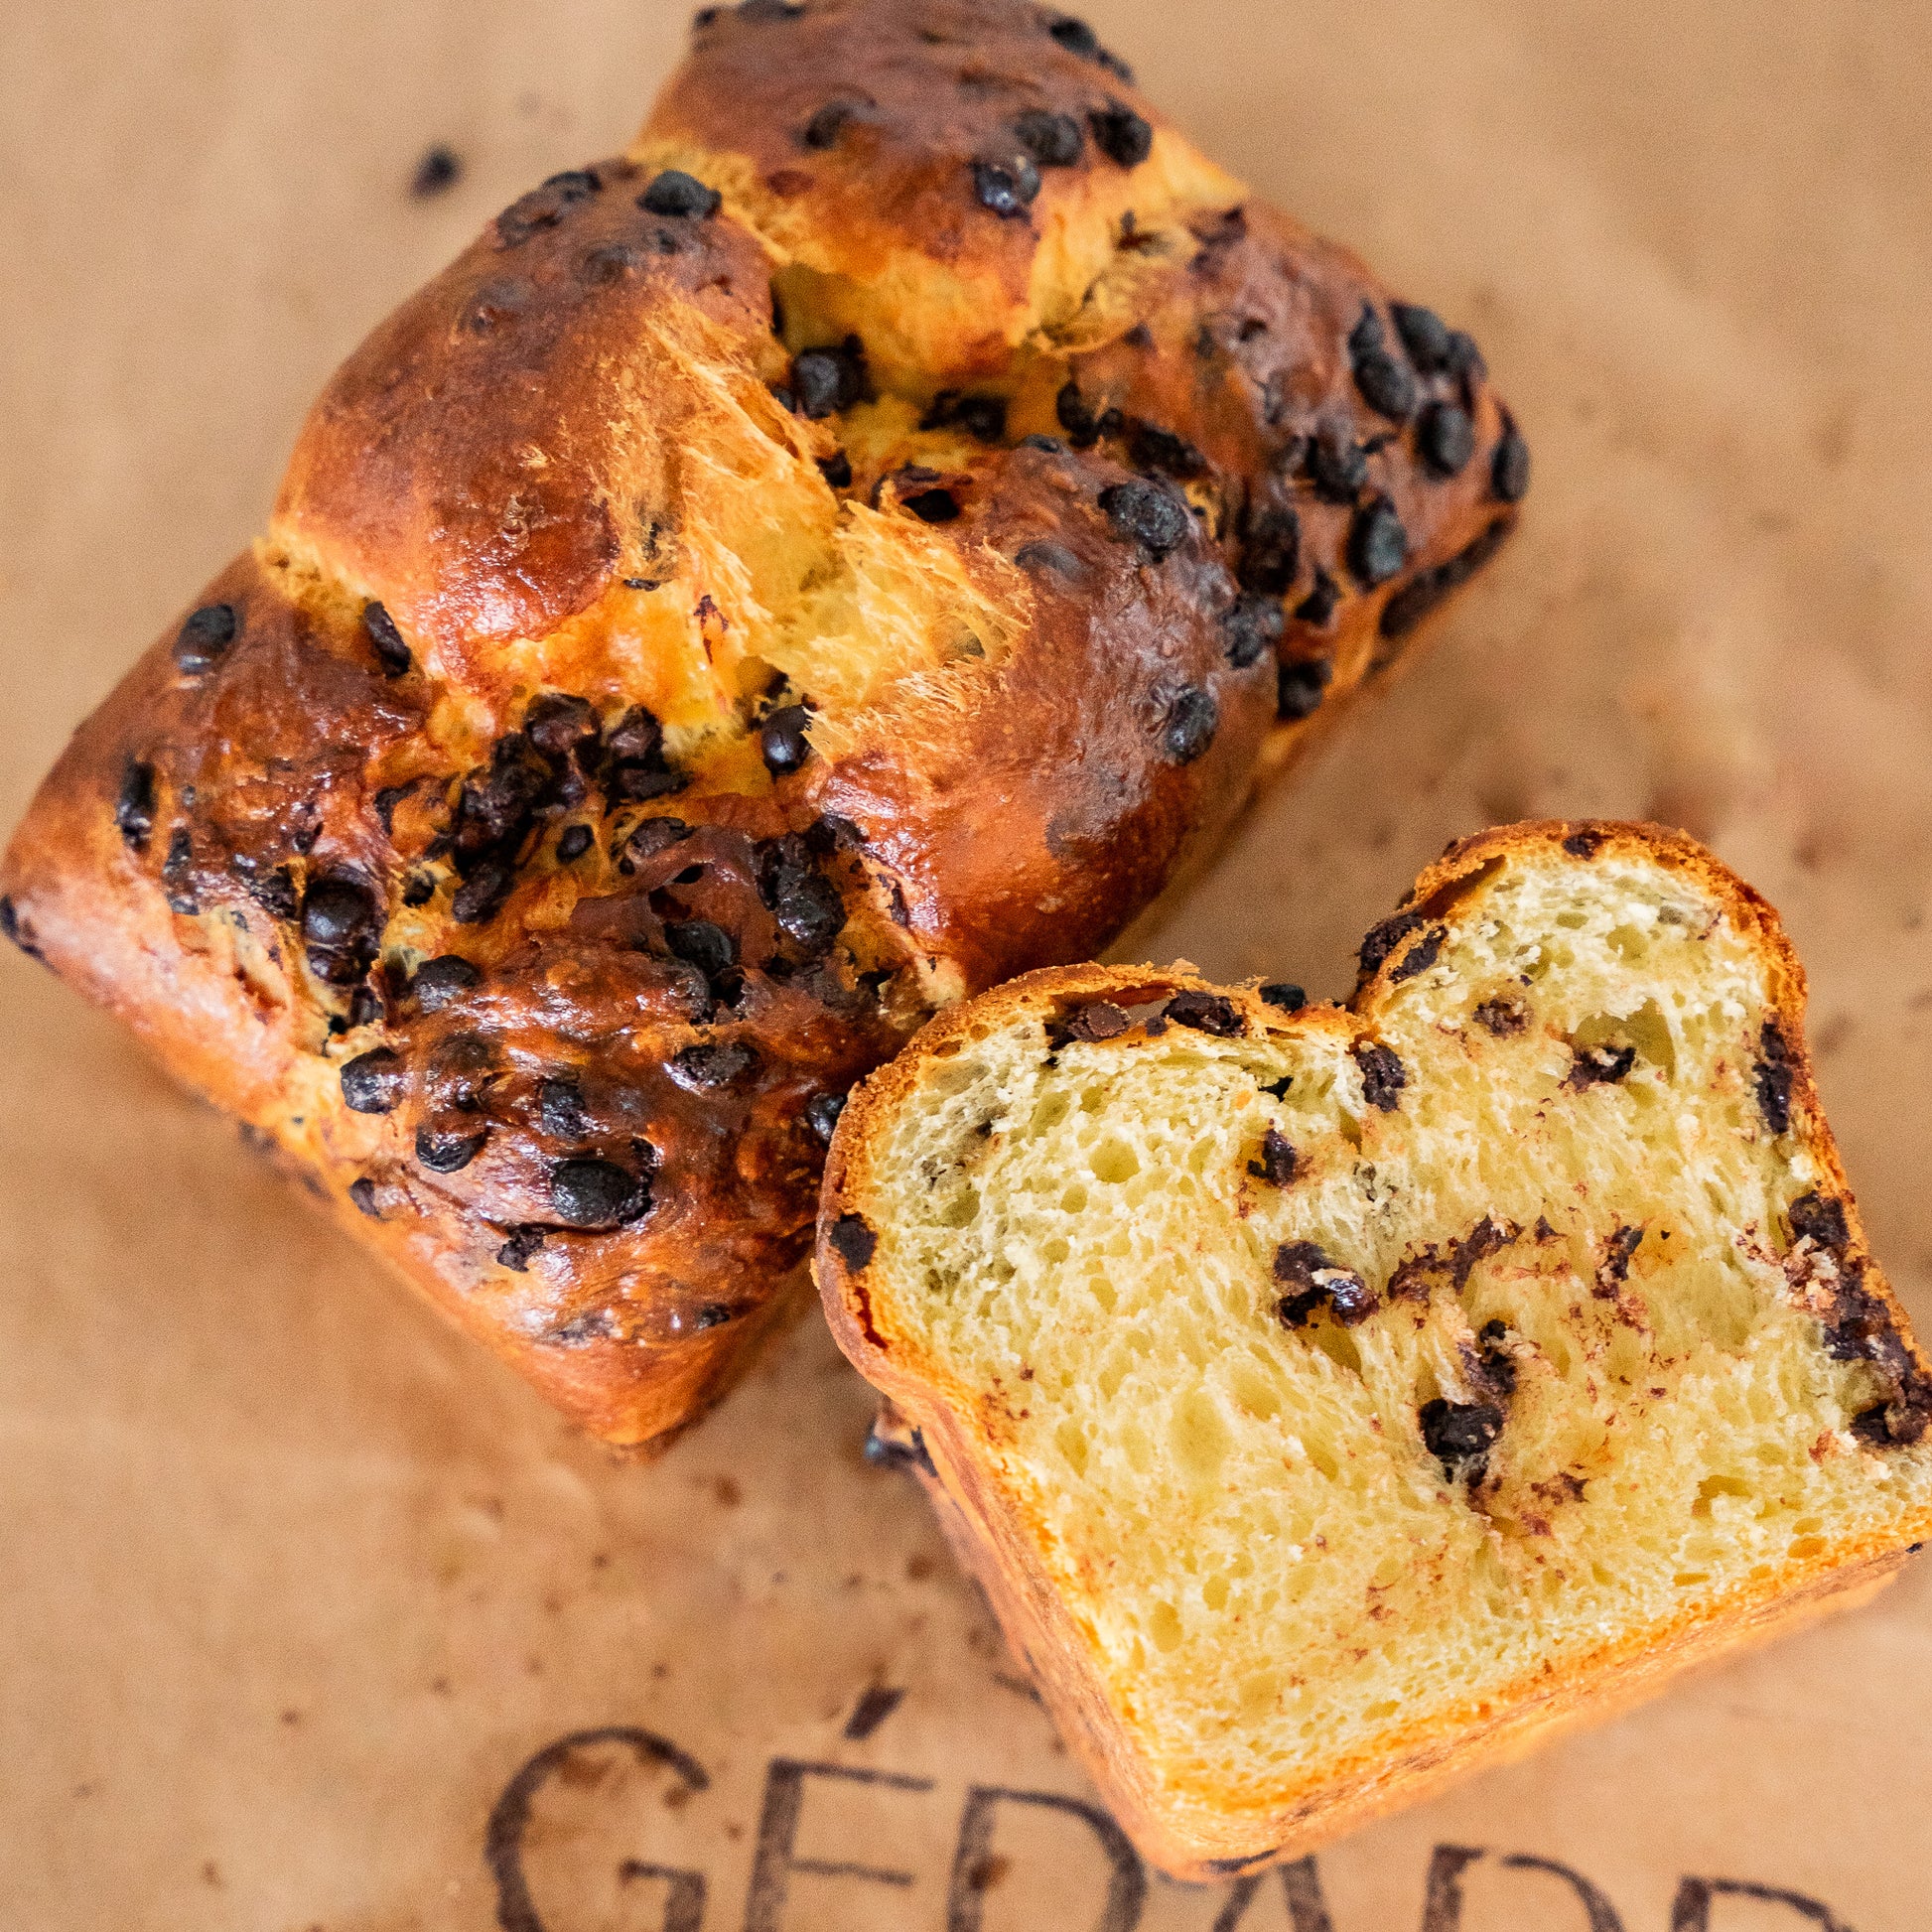 A Chocolate Brioche with lots of chocolate chips on top next to a loaf of Chocolate Brioche.